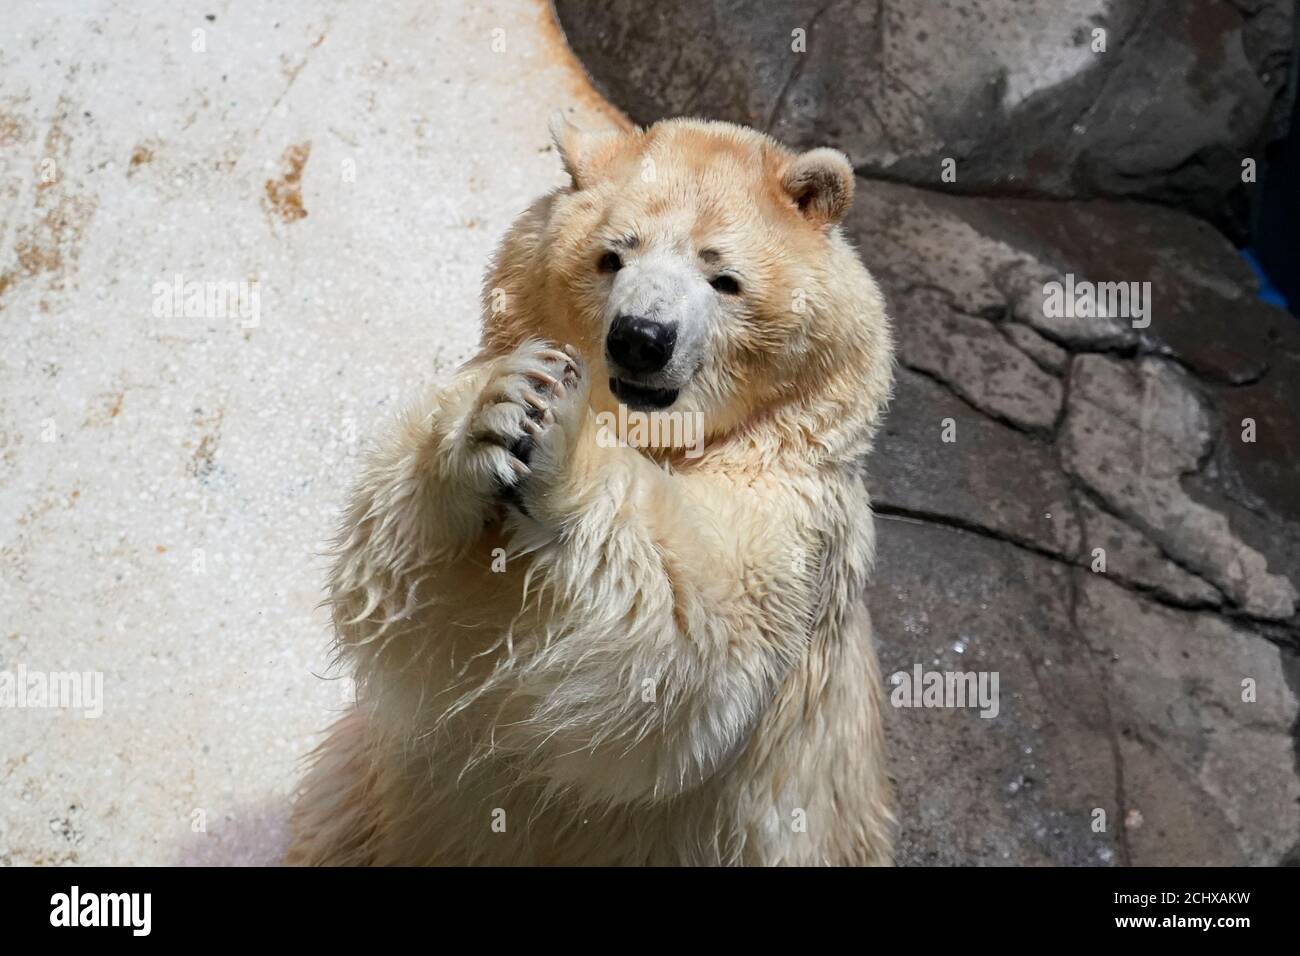 Polar Bear Jing Jing Puts Its Front Paws Together At Its Enclosure At The Wuhan Haichang Polar Ocean World By Haichang Ocean Park In Wuhan Hubei Province China January 31 2019 Picture